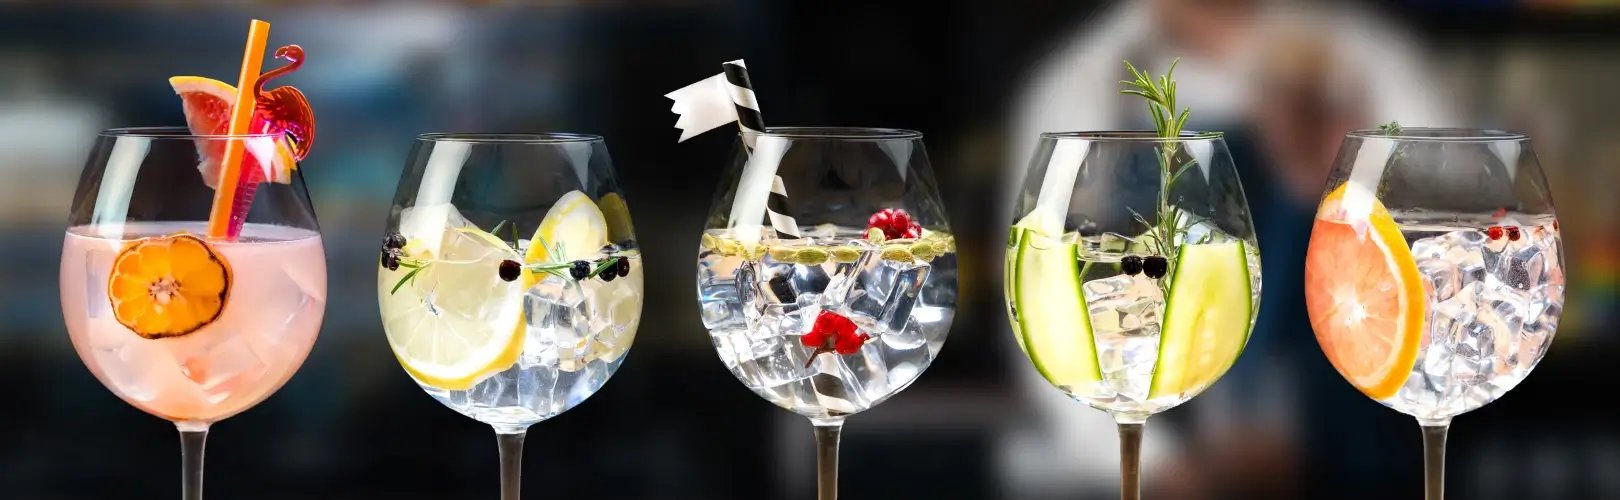 Buy all Your Flavored Gin Online